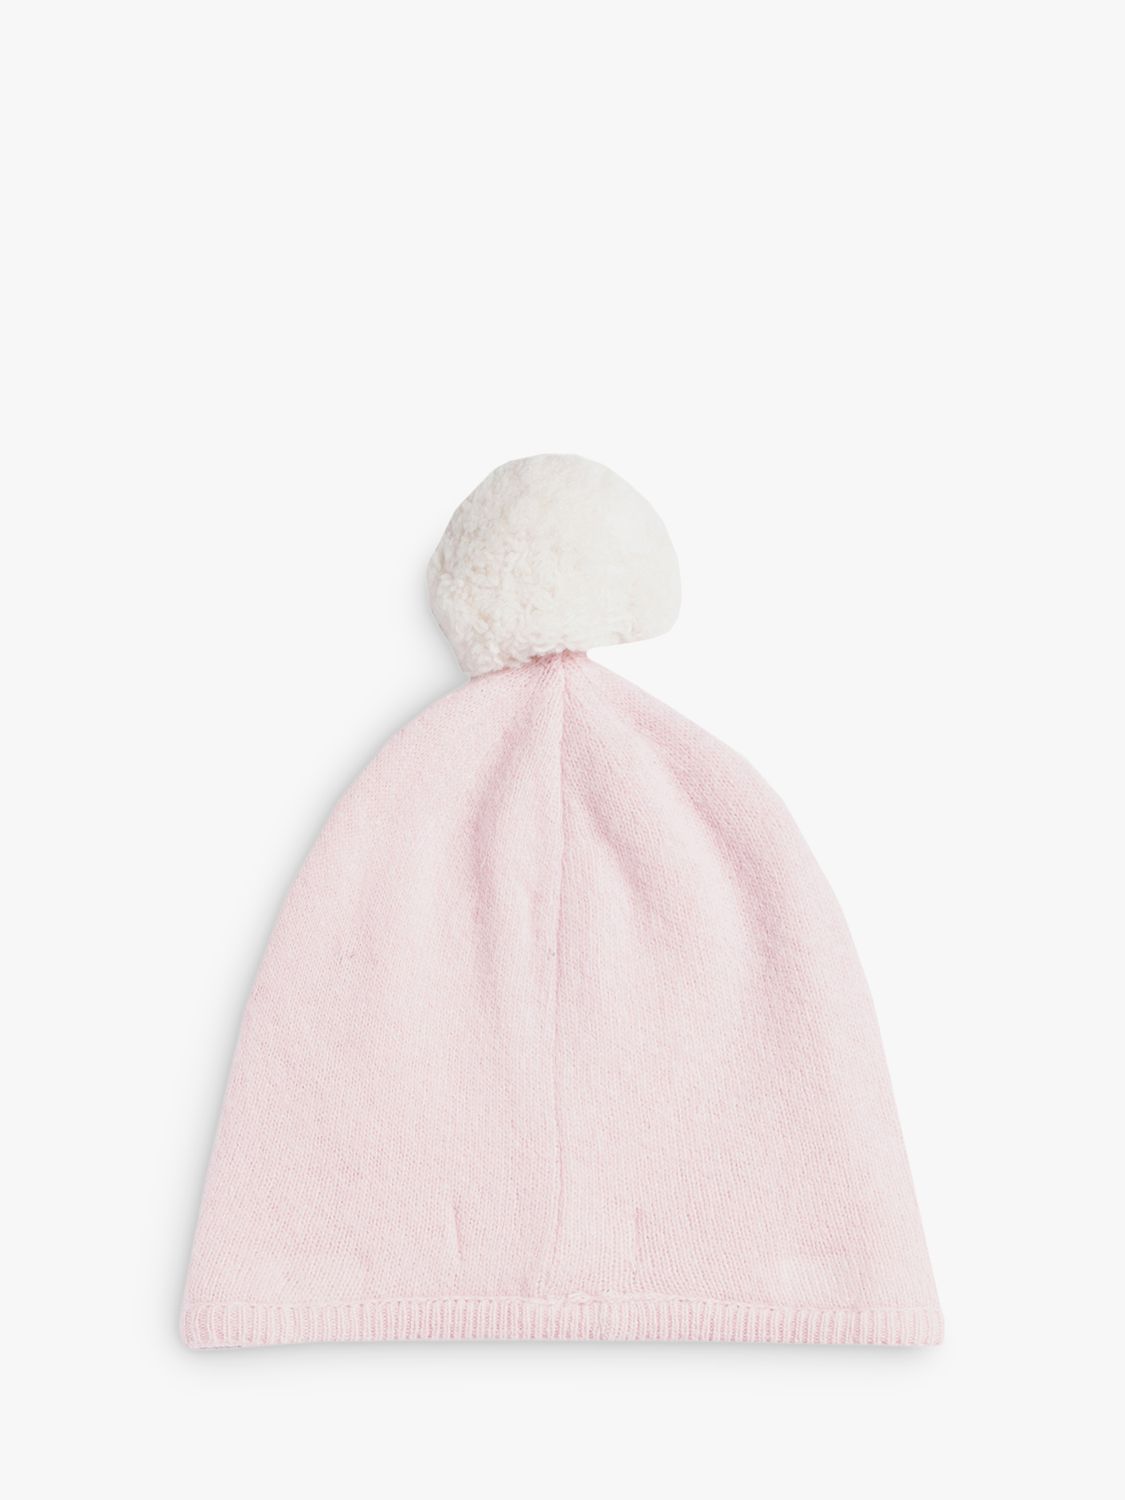 Buy Trotters Baby Jemima Bobble Hat, Pale Pink Online at johnlewis.com